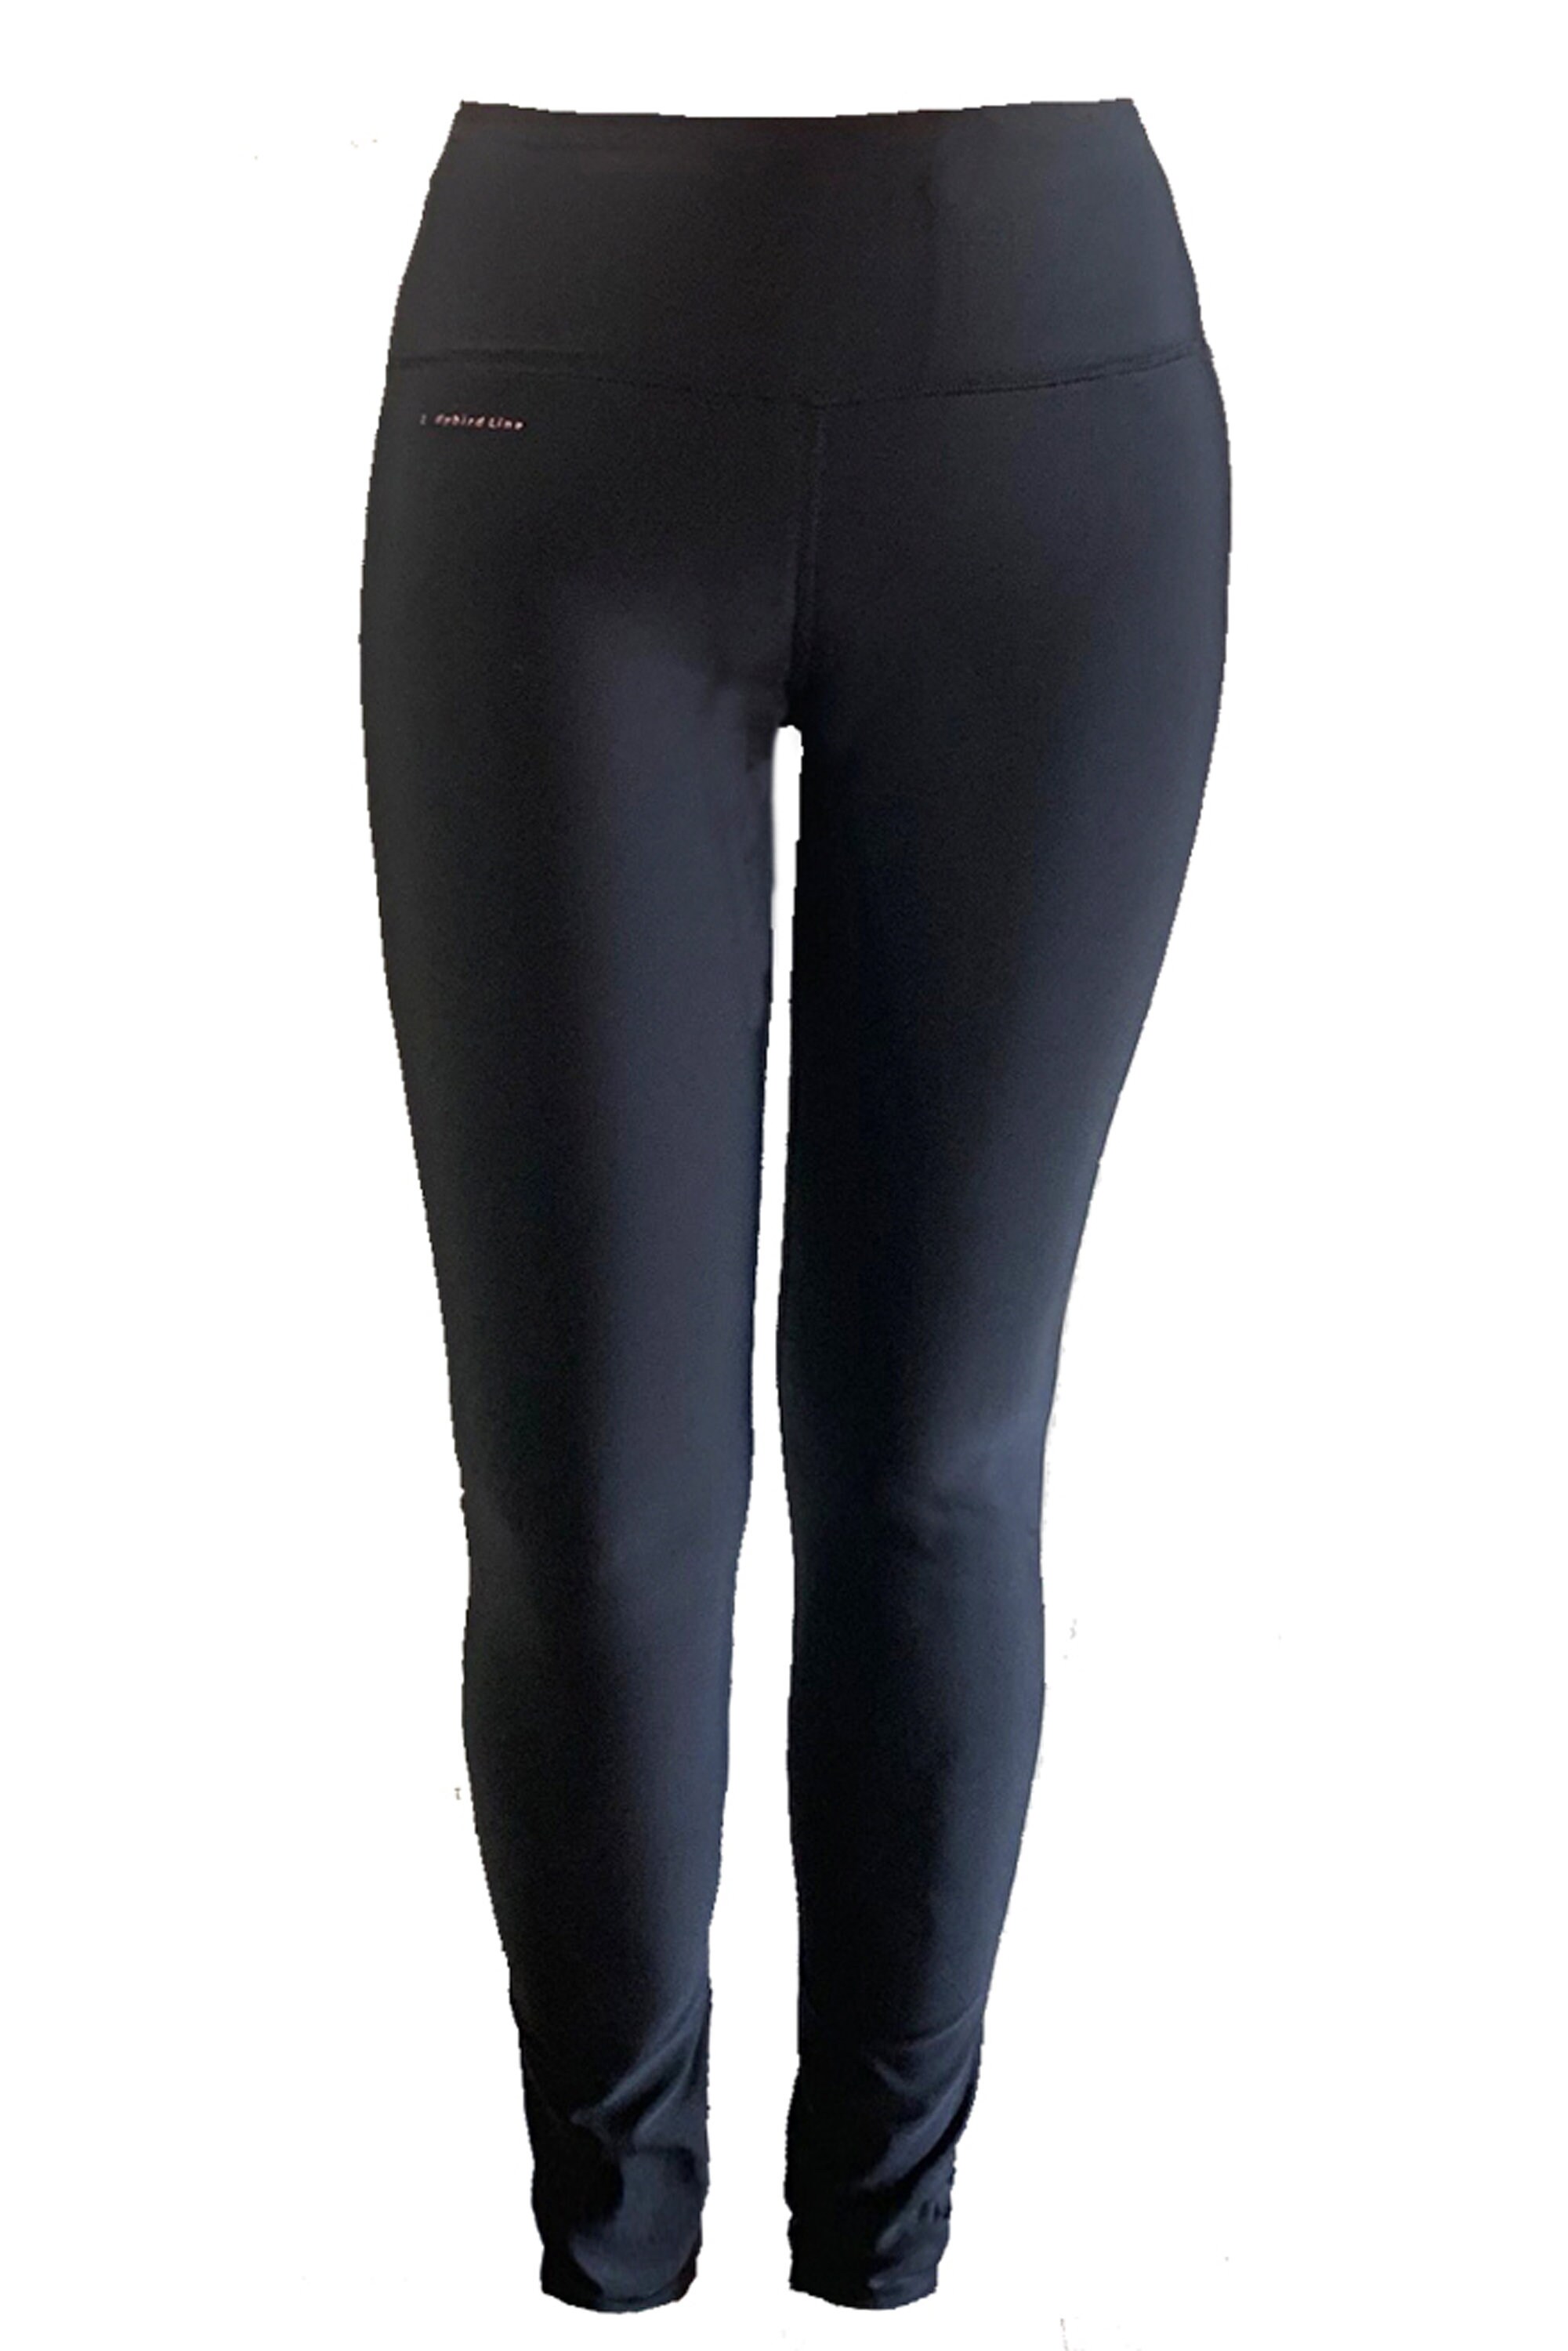 CPC Leggings are perfect apparel for pet grooming professionals